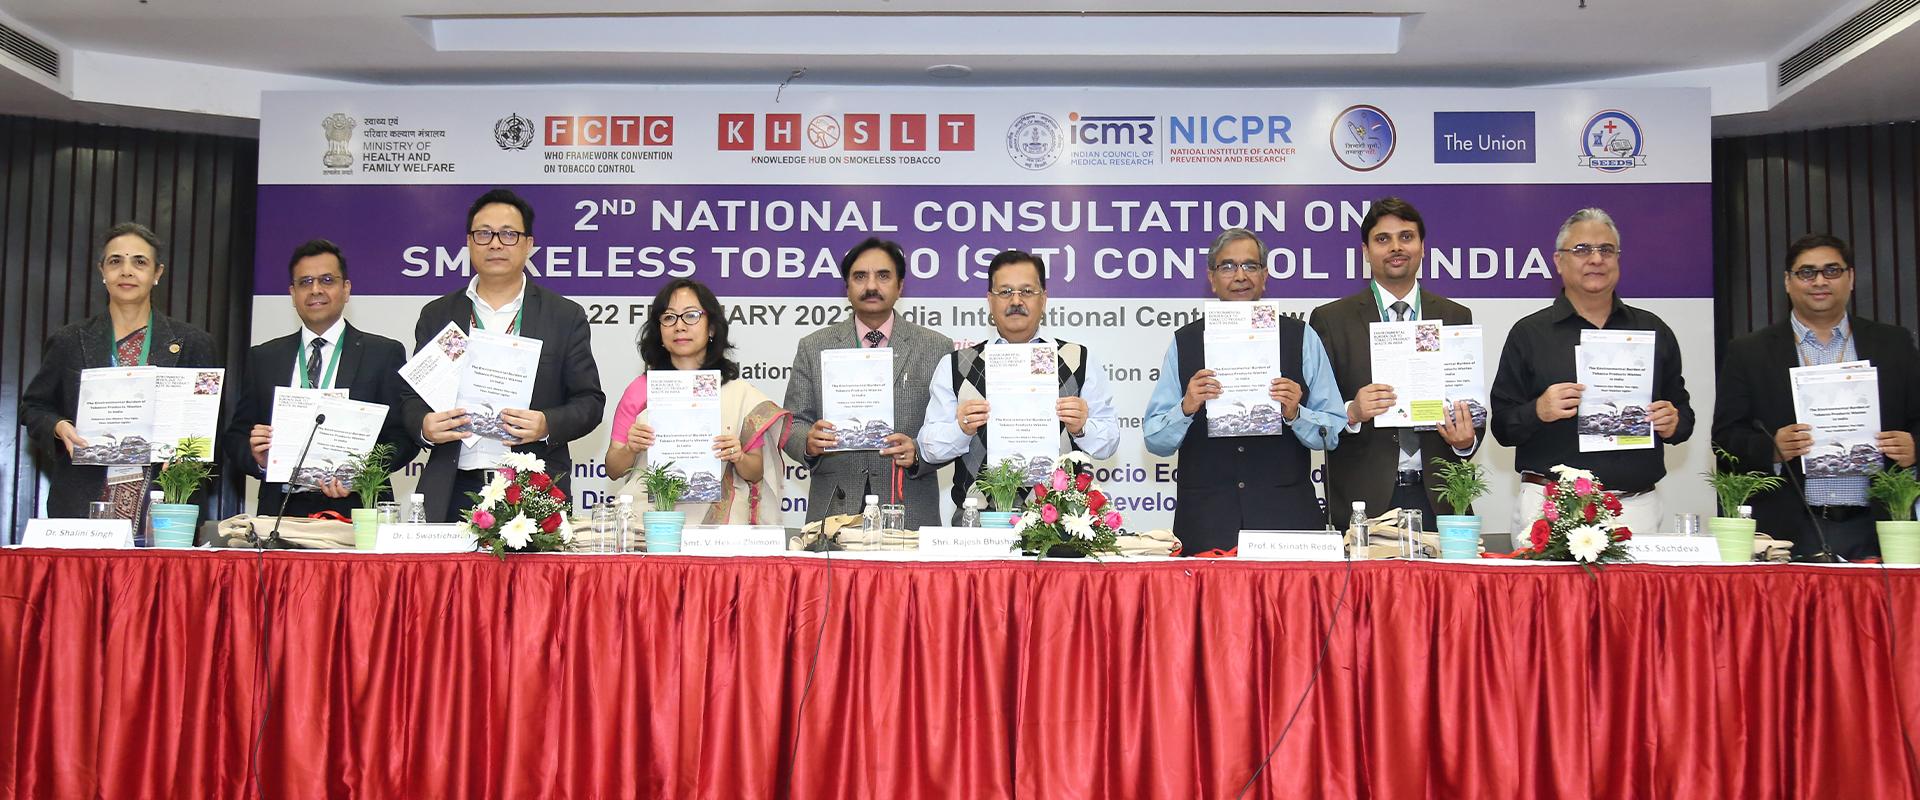 2nd National Consultation